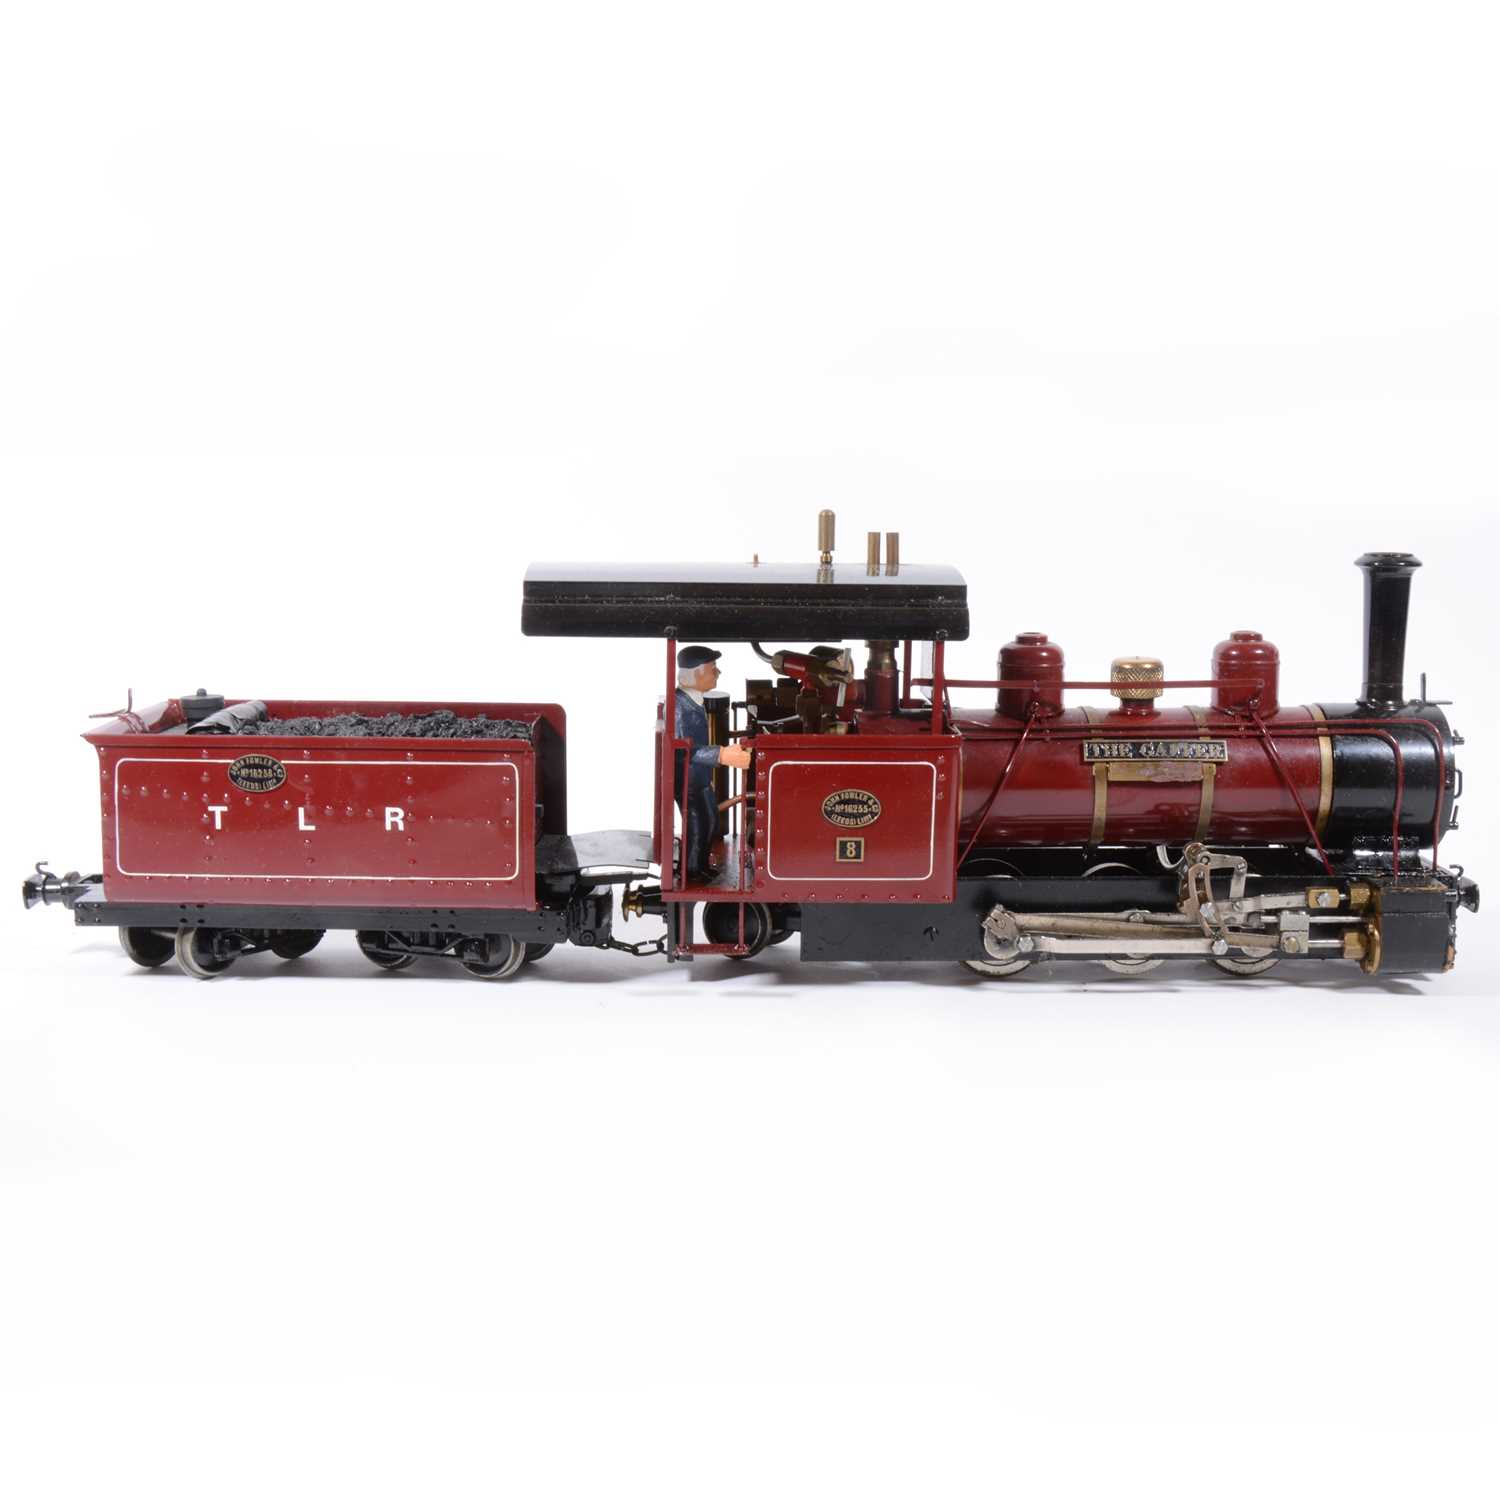 Lot 52 - Roundhouse live steam, gauge 1 / G scale, 32mm locomotive and tender, 'The Gaffer' Liberty Belle MkII, TLR 0-6-2 no.8, maroon.